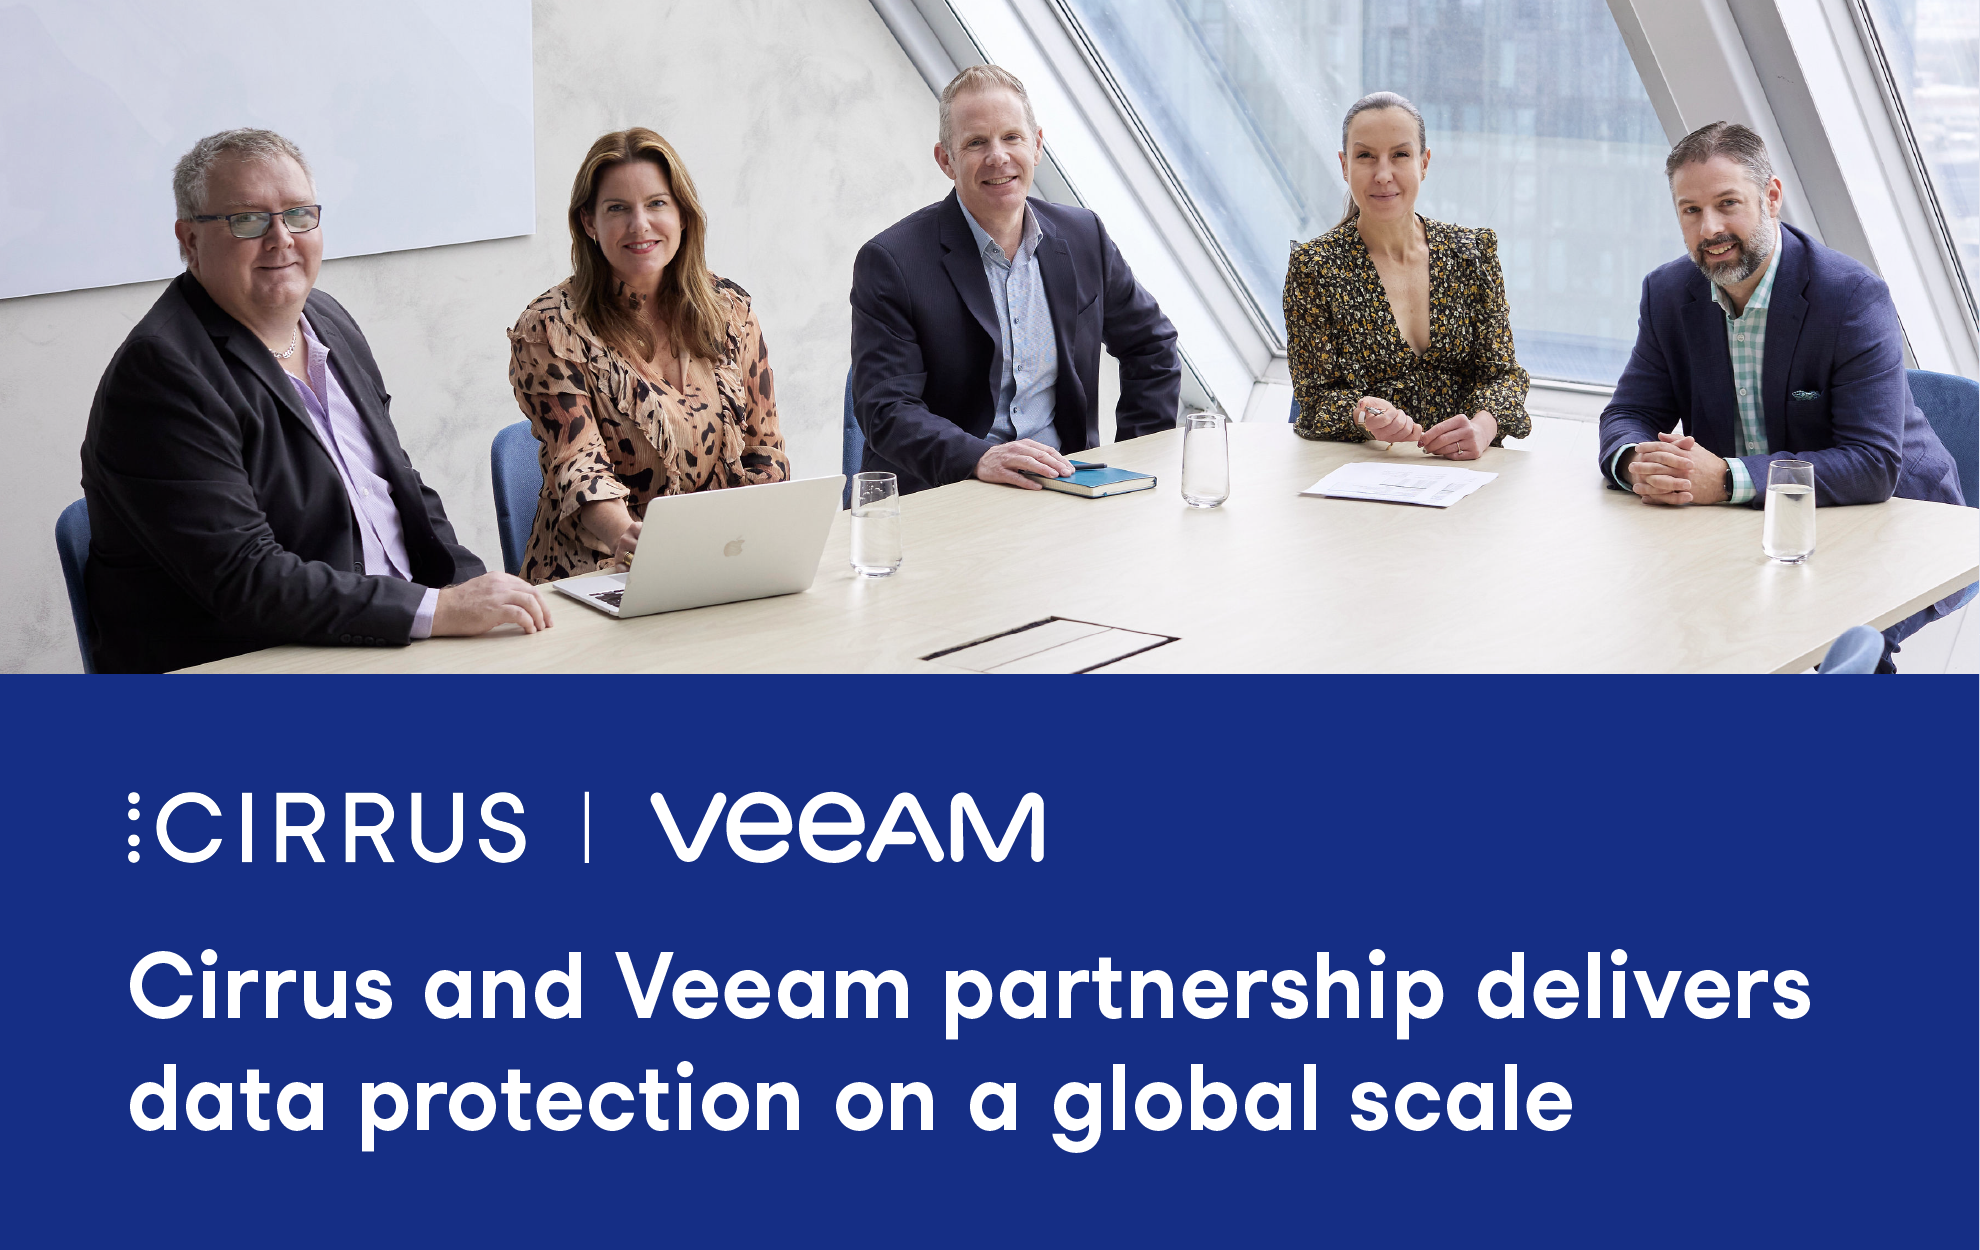 Cirrus and Veeam partnership delivers data protection on a global scale